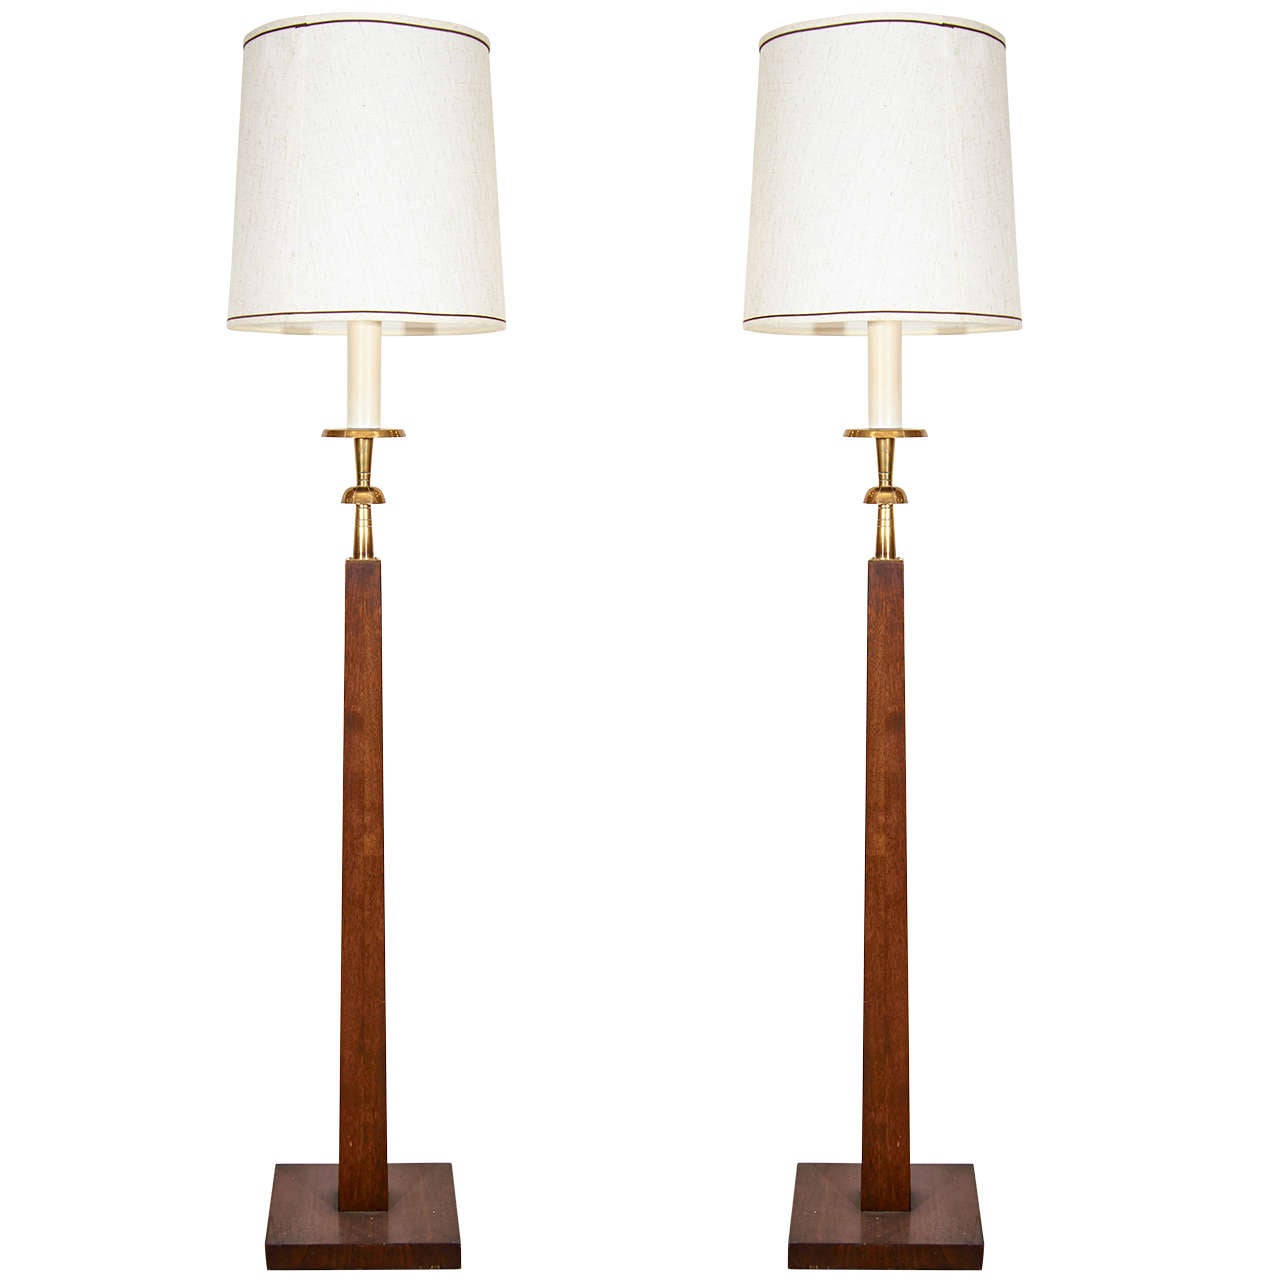 Pair of Mid Century Wood Floor Lamps Attributed to Tommi Parzinger